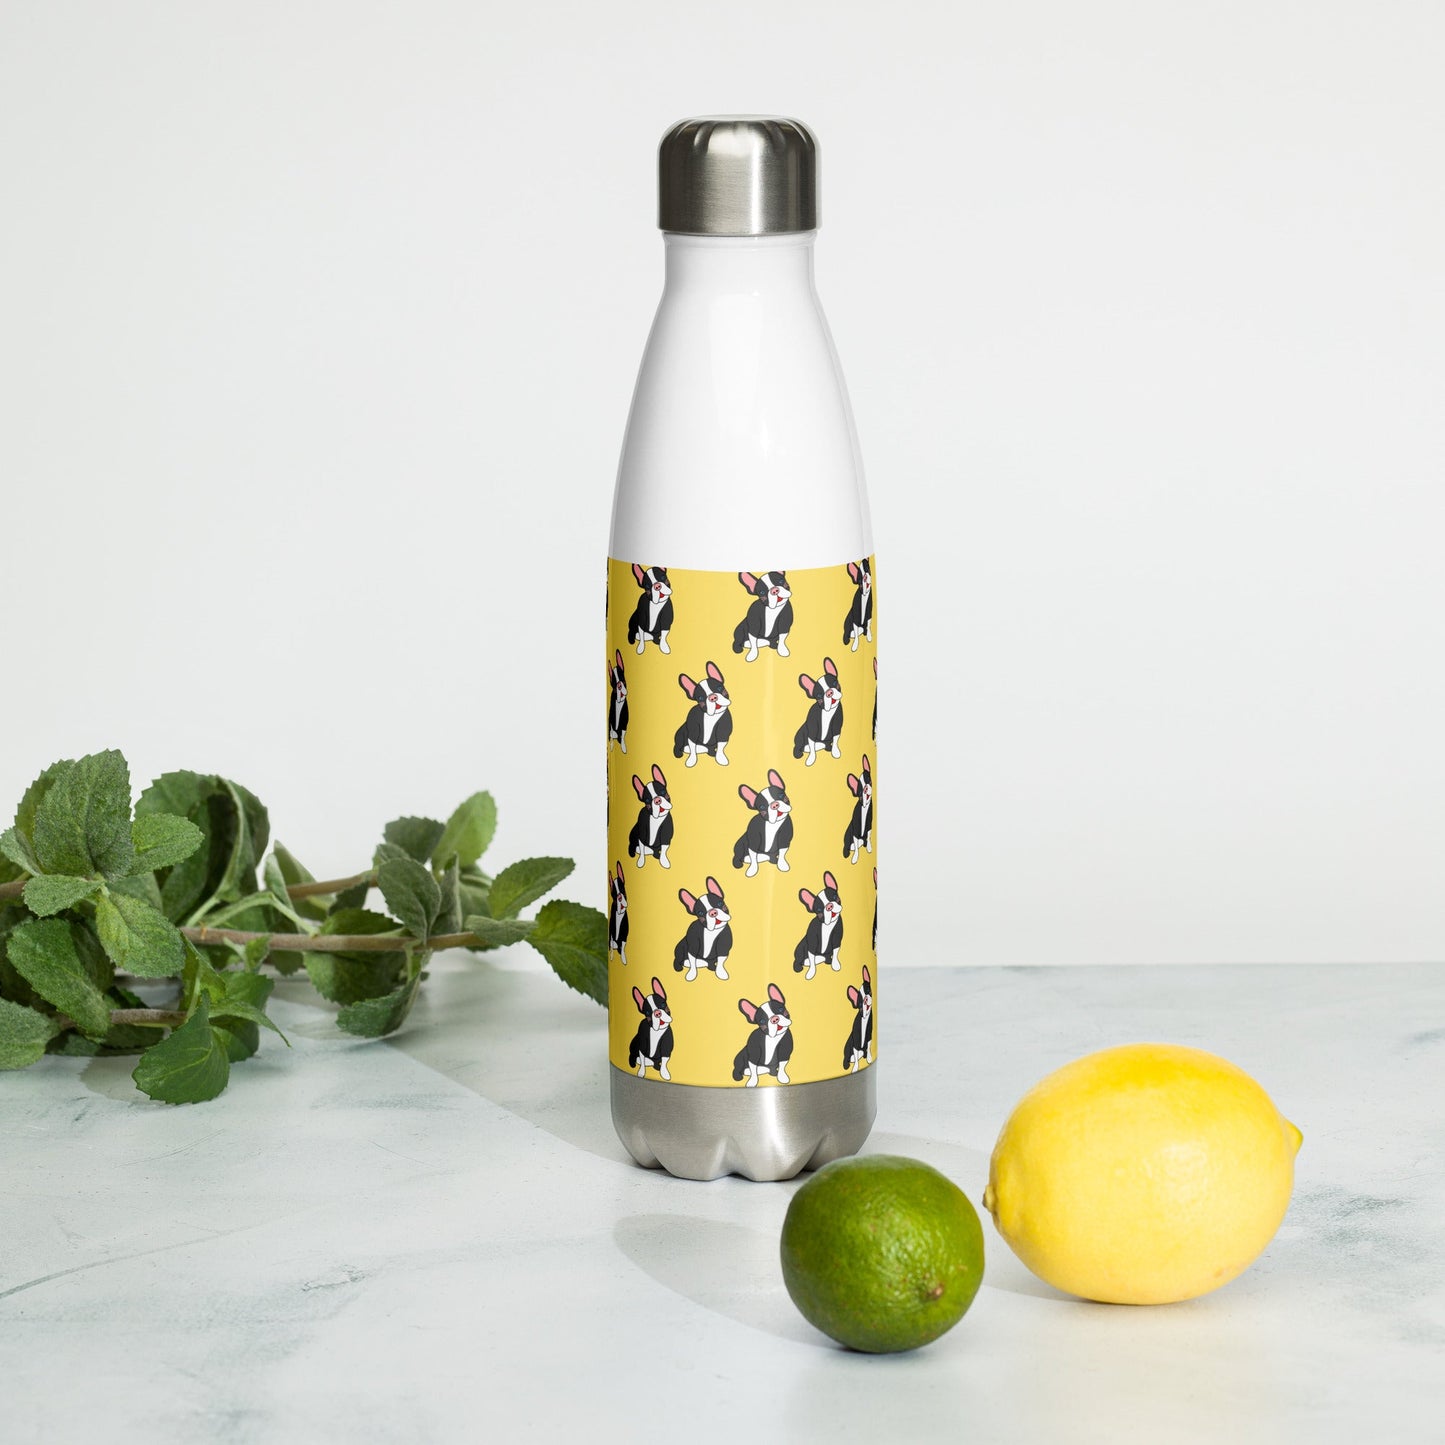 Frenchie Stainless Steel Water Bottle - Designs by DKMc